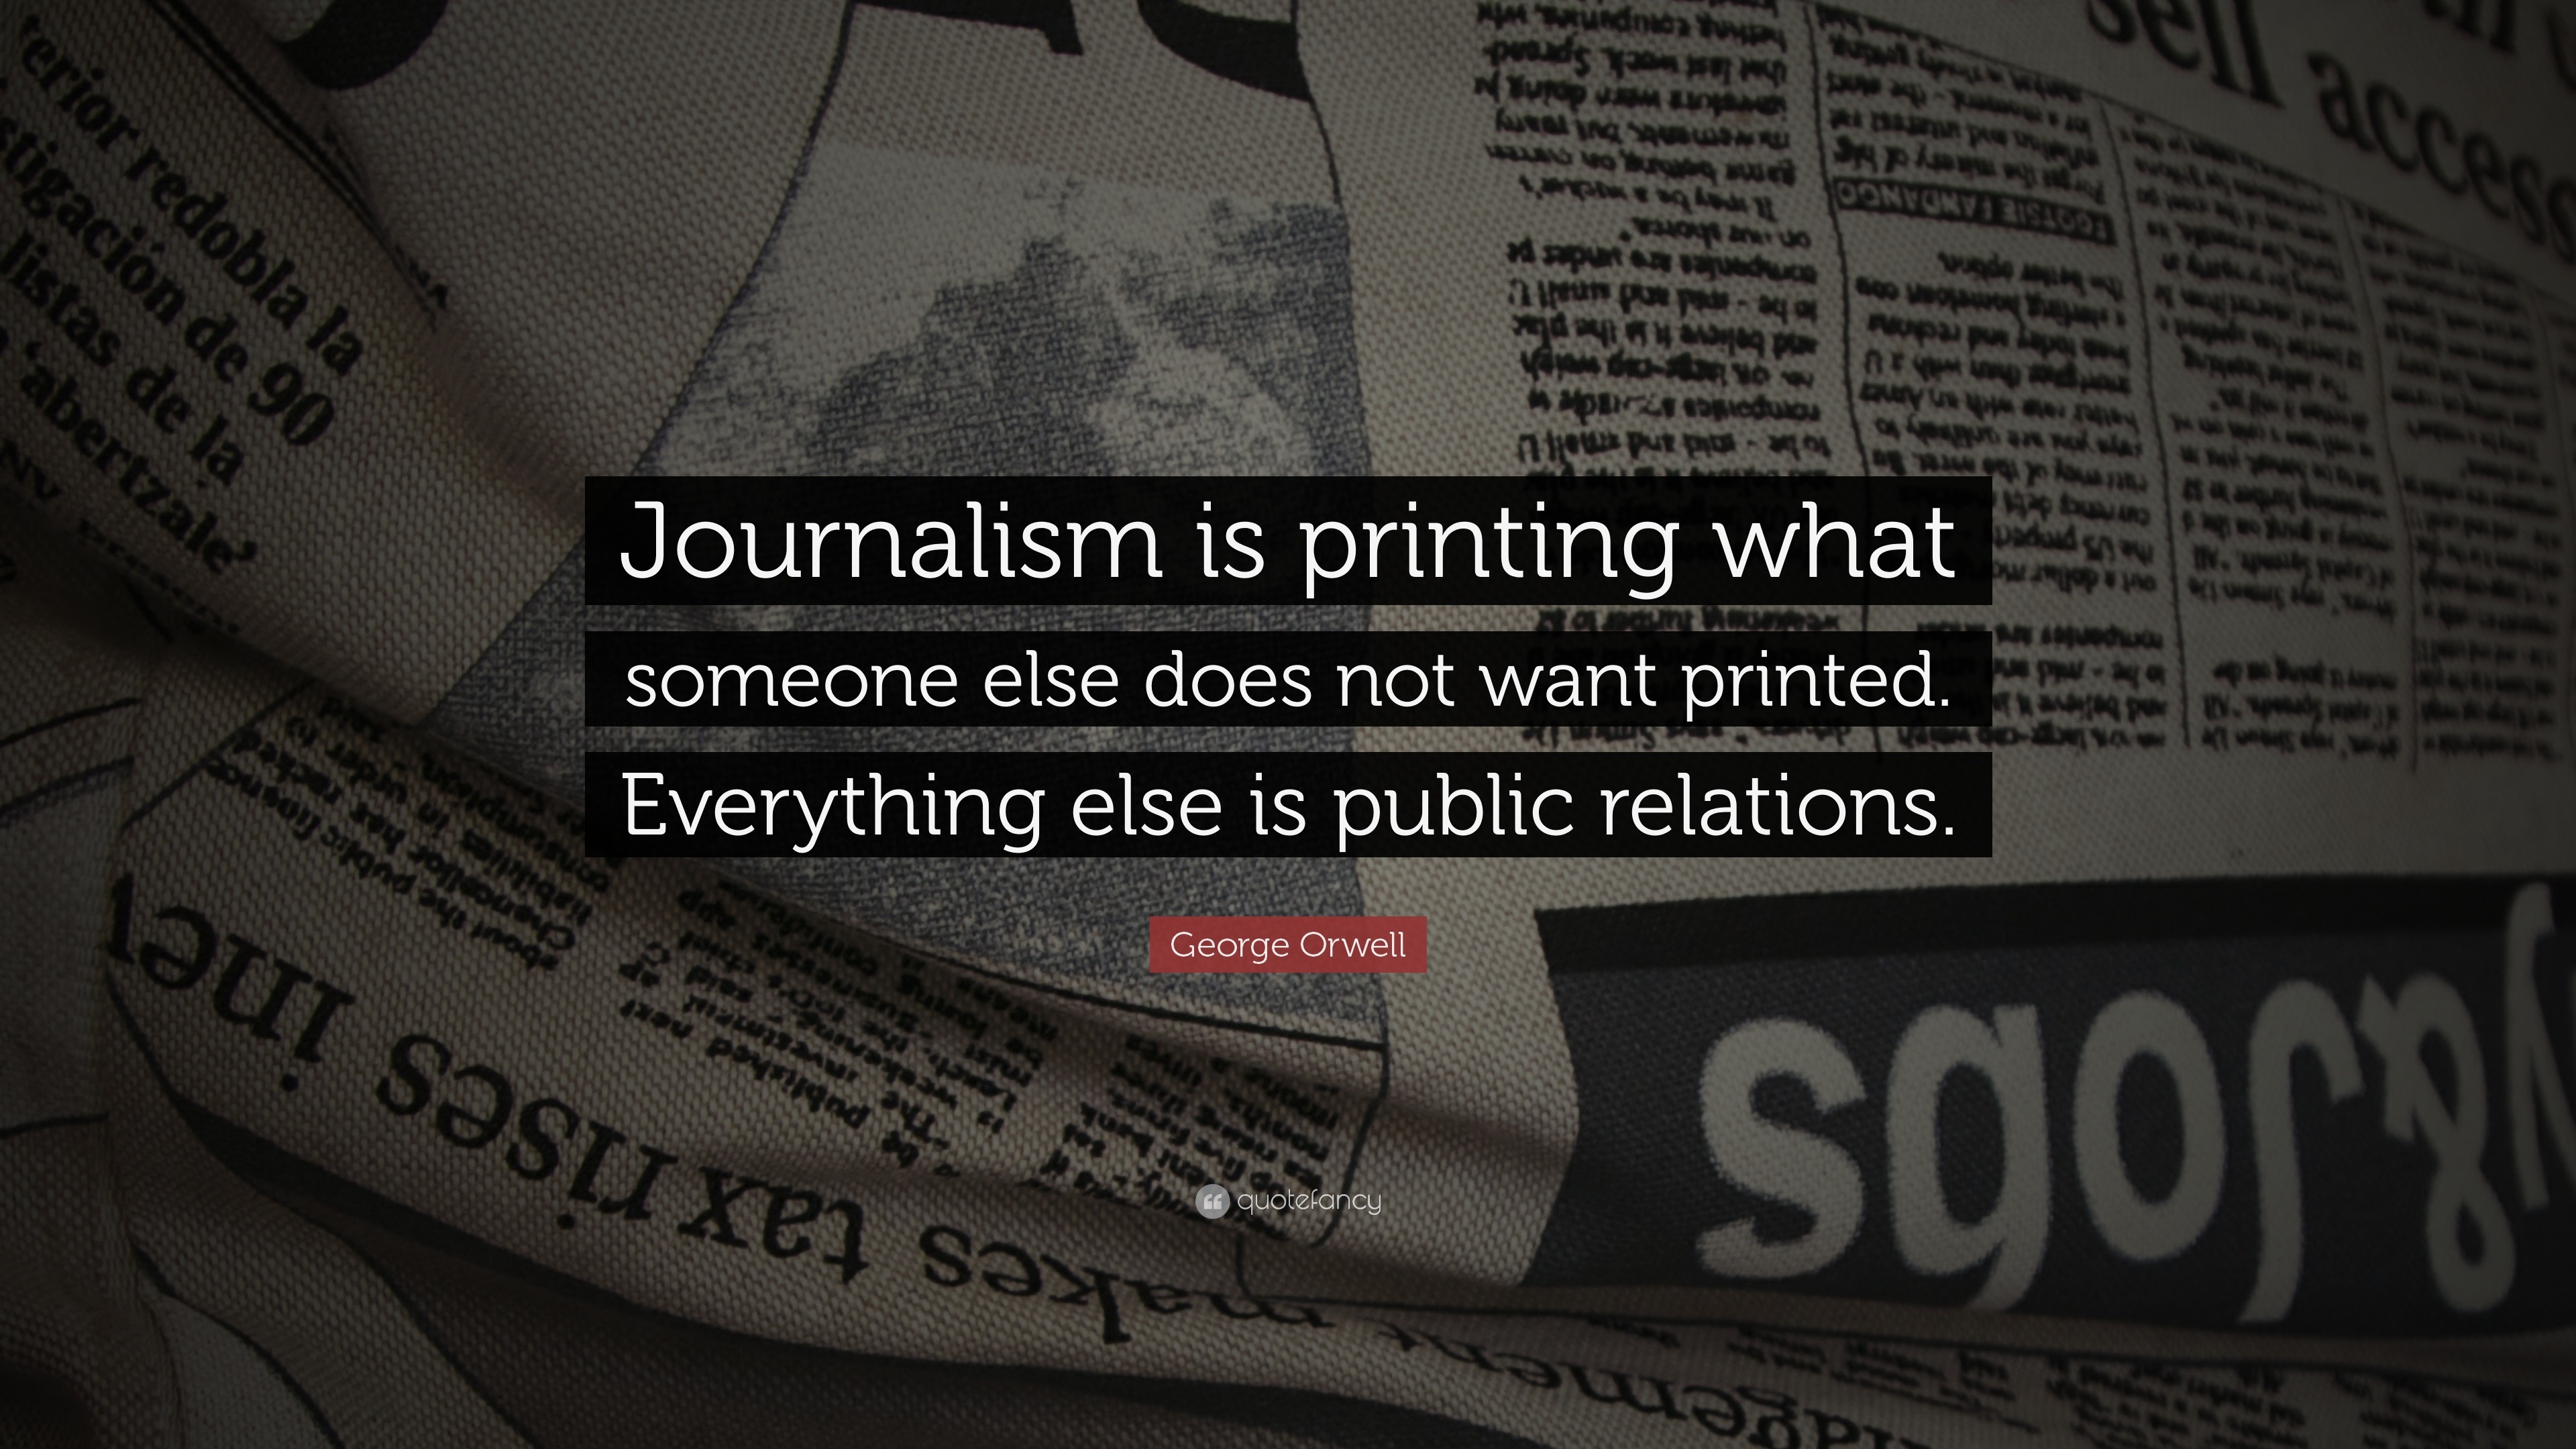 George Orwell Quote: “Journalism is printing what someone else does not